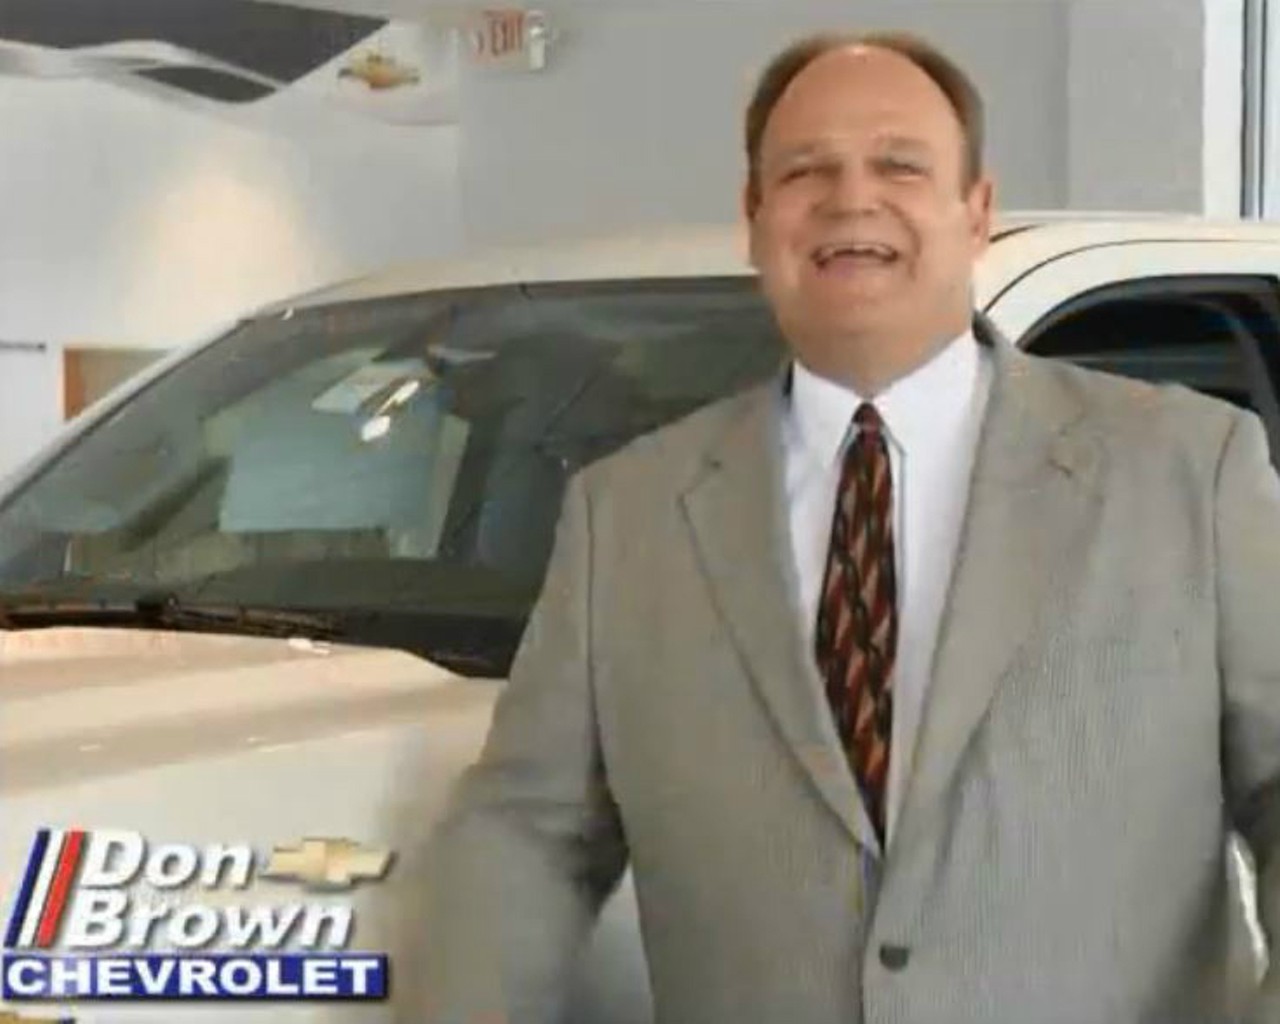 You've learned which guy's dealership is "at the entrance to the Hill."
Photo courtesy of screengrab via YouTube